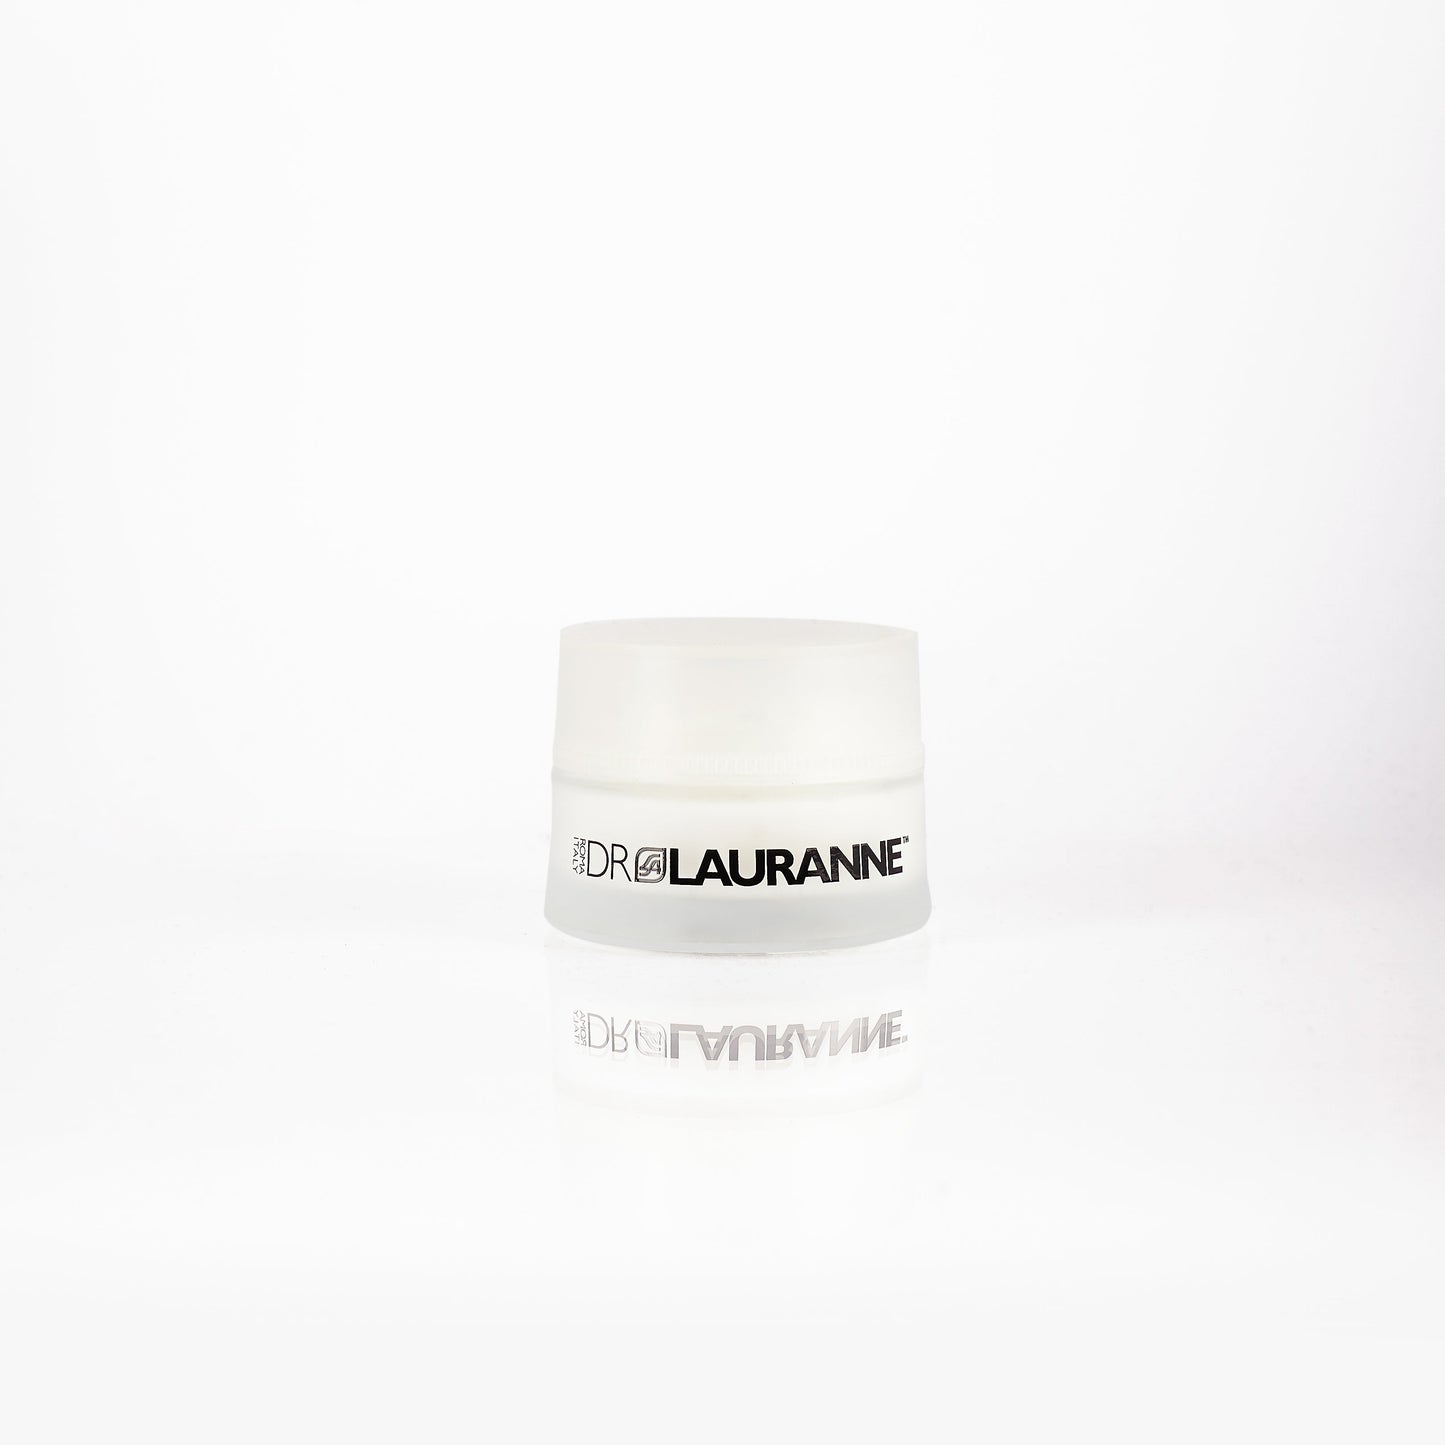 Day cream with lifting effect based on hyaluronic acid